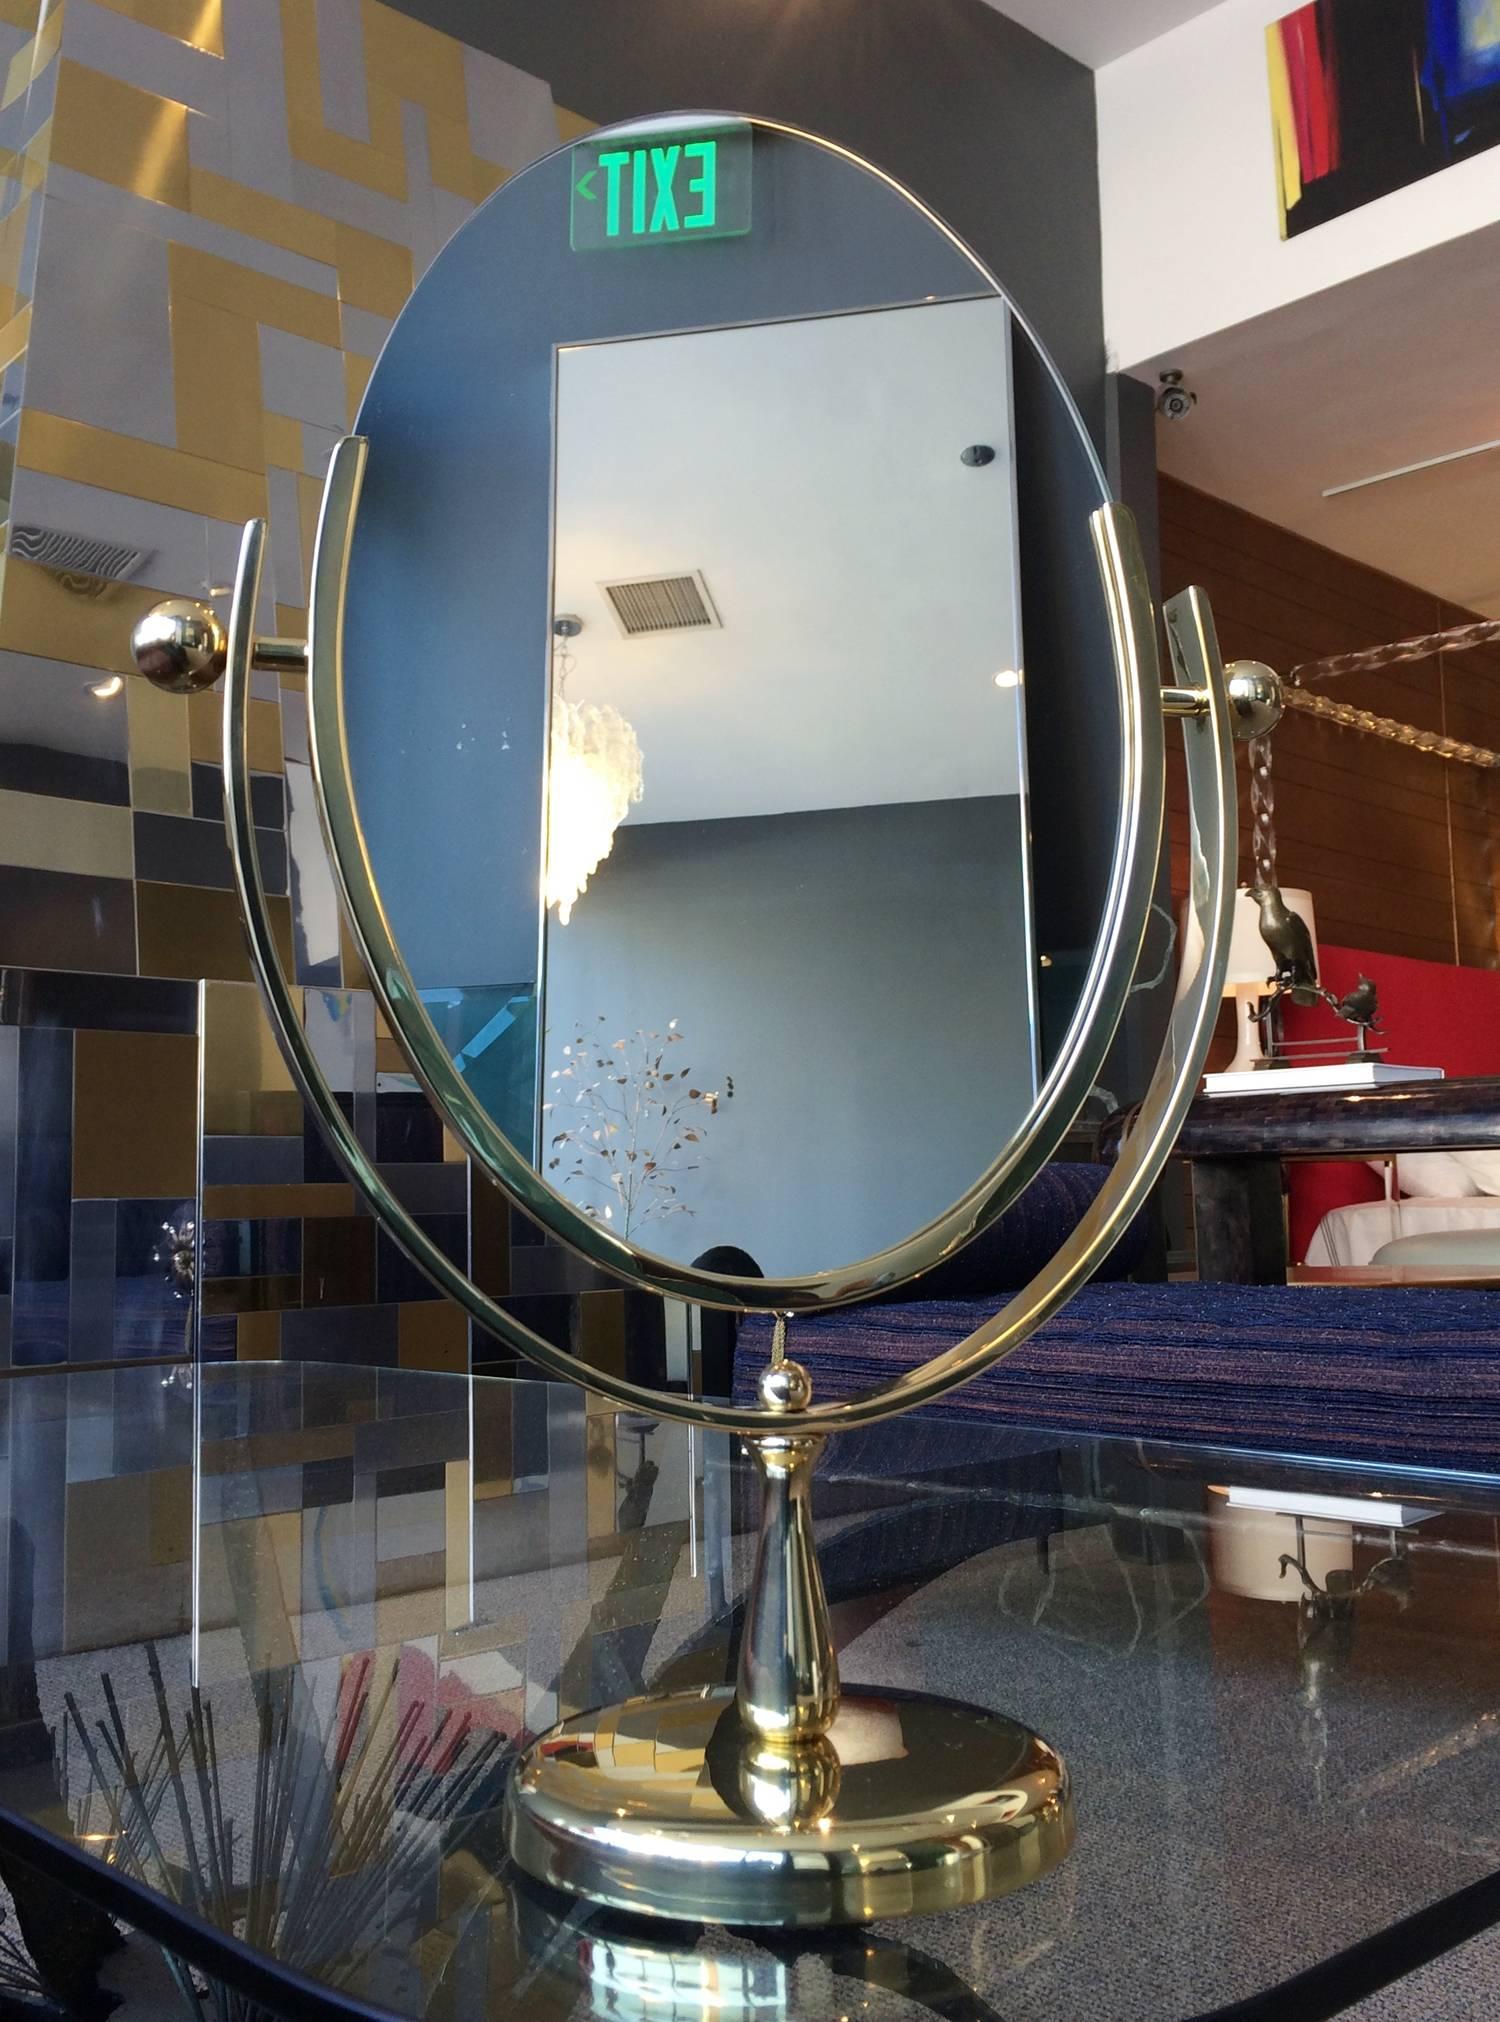 Beautiful oval mirror designed and manufactured by Charles Hollis Jones in the 1960s. The mirror has a polished brass finished frame and base, the mirror is double sided and it can be flipped to be used on either side.
The piece is signed by the